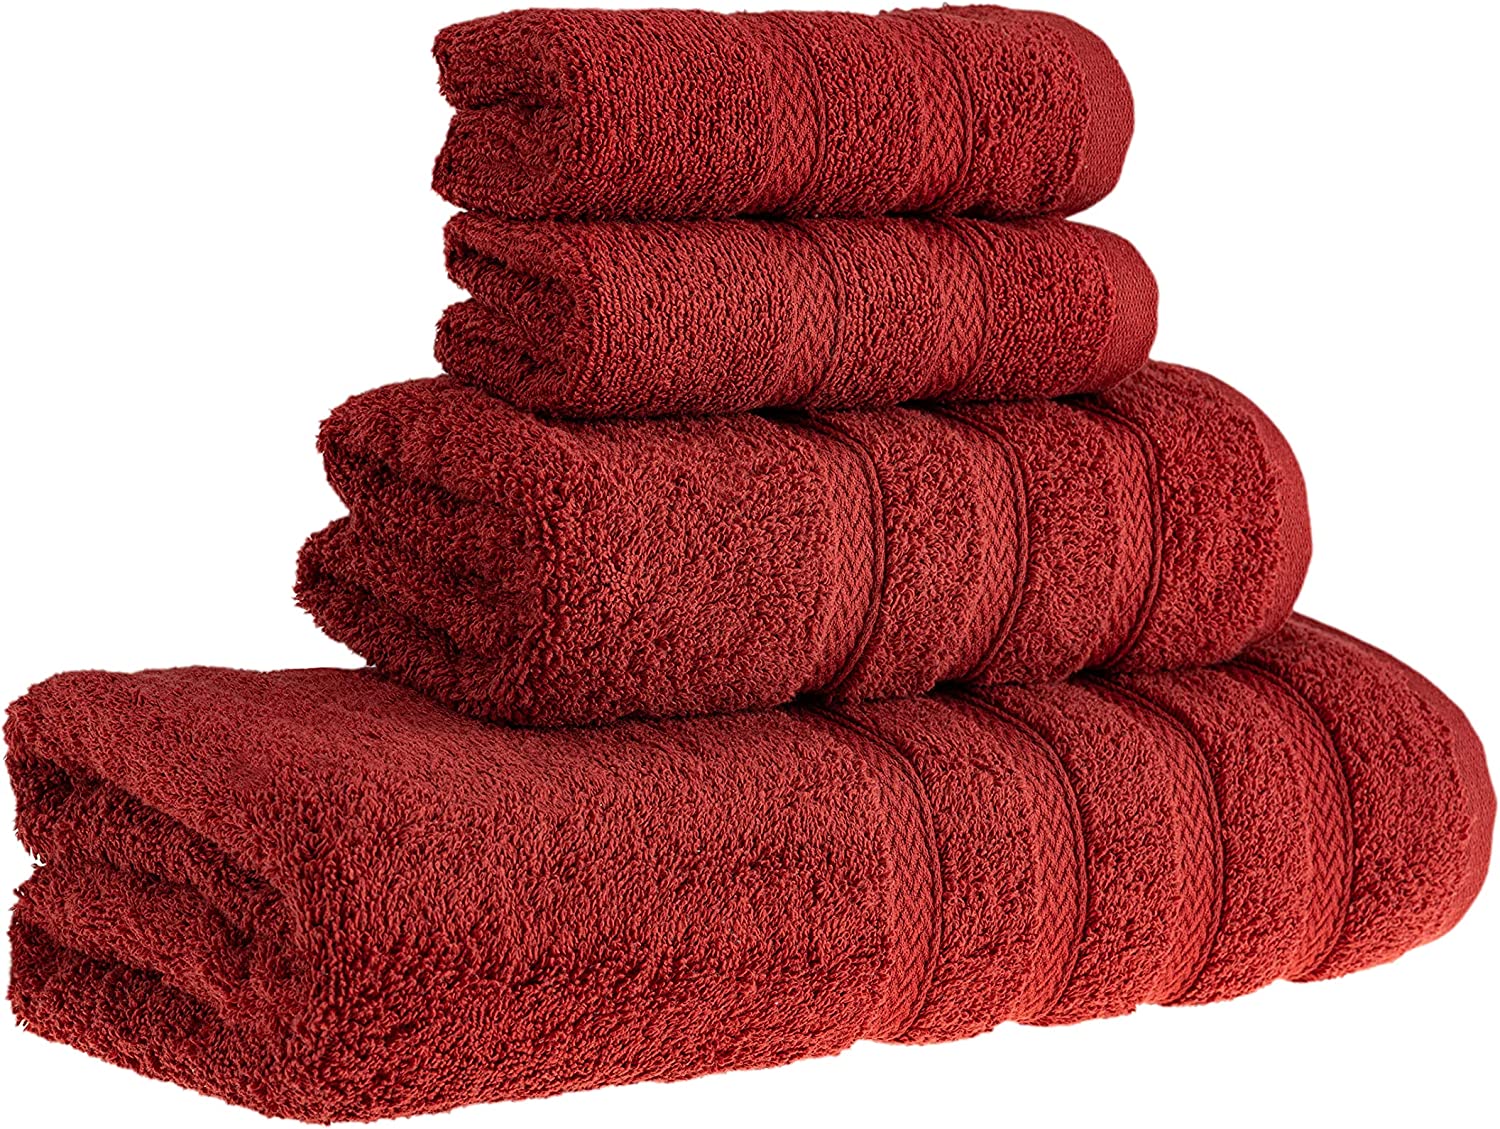 HALLEY Decorative Bath Towels Set, 6 Piece - Turkish Towel Set with Floral  Pattern, Highly Absorbent & Fade Resistant Fabric, 100% Cotton - Brown